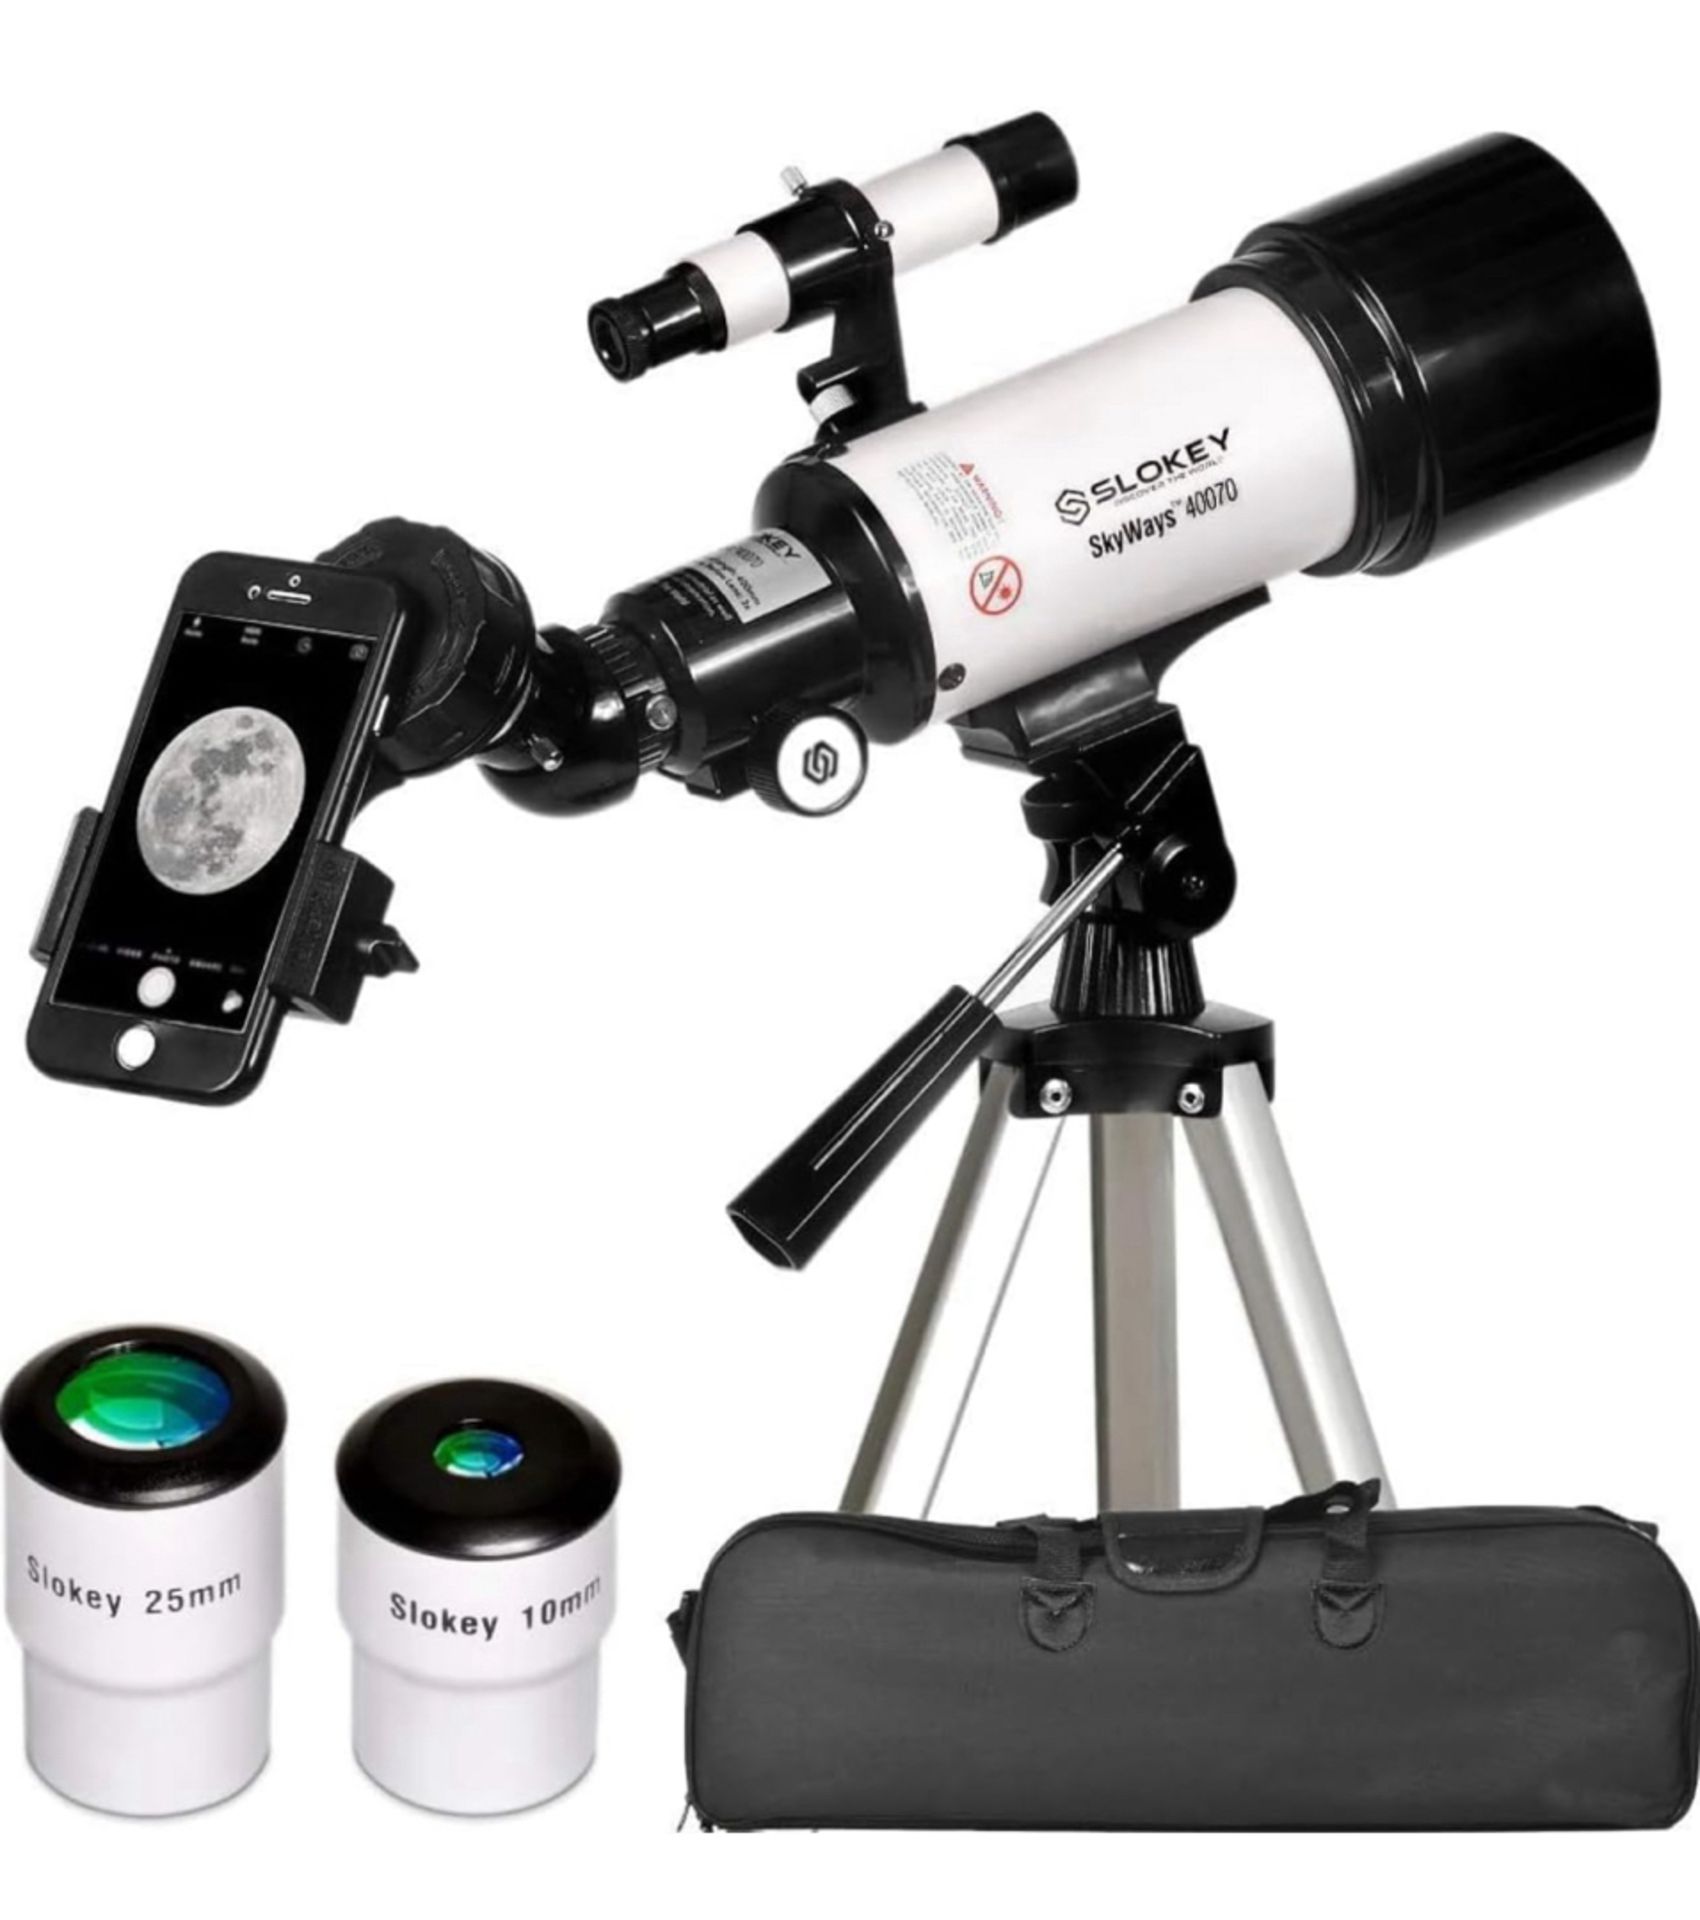 Slokey 40070 SKYWAYS TELESCOPE FOR ASTRONOMY WITH ACCESSORIES (NEW) - AMAZON PRICE Â£129.99! - Image 2 of 9